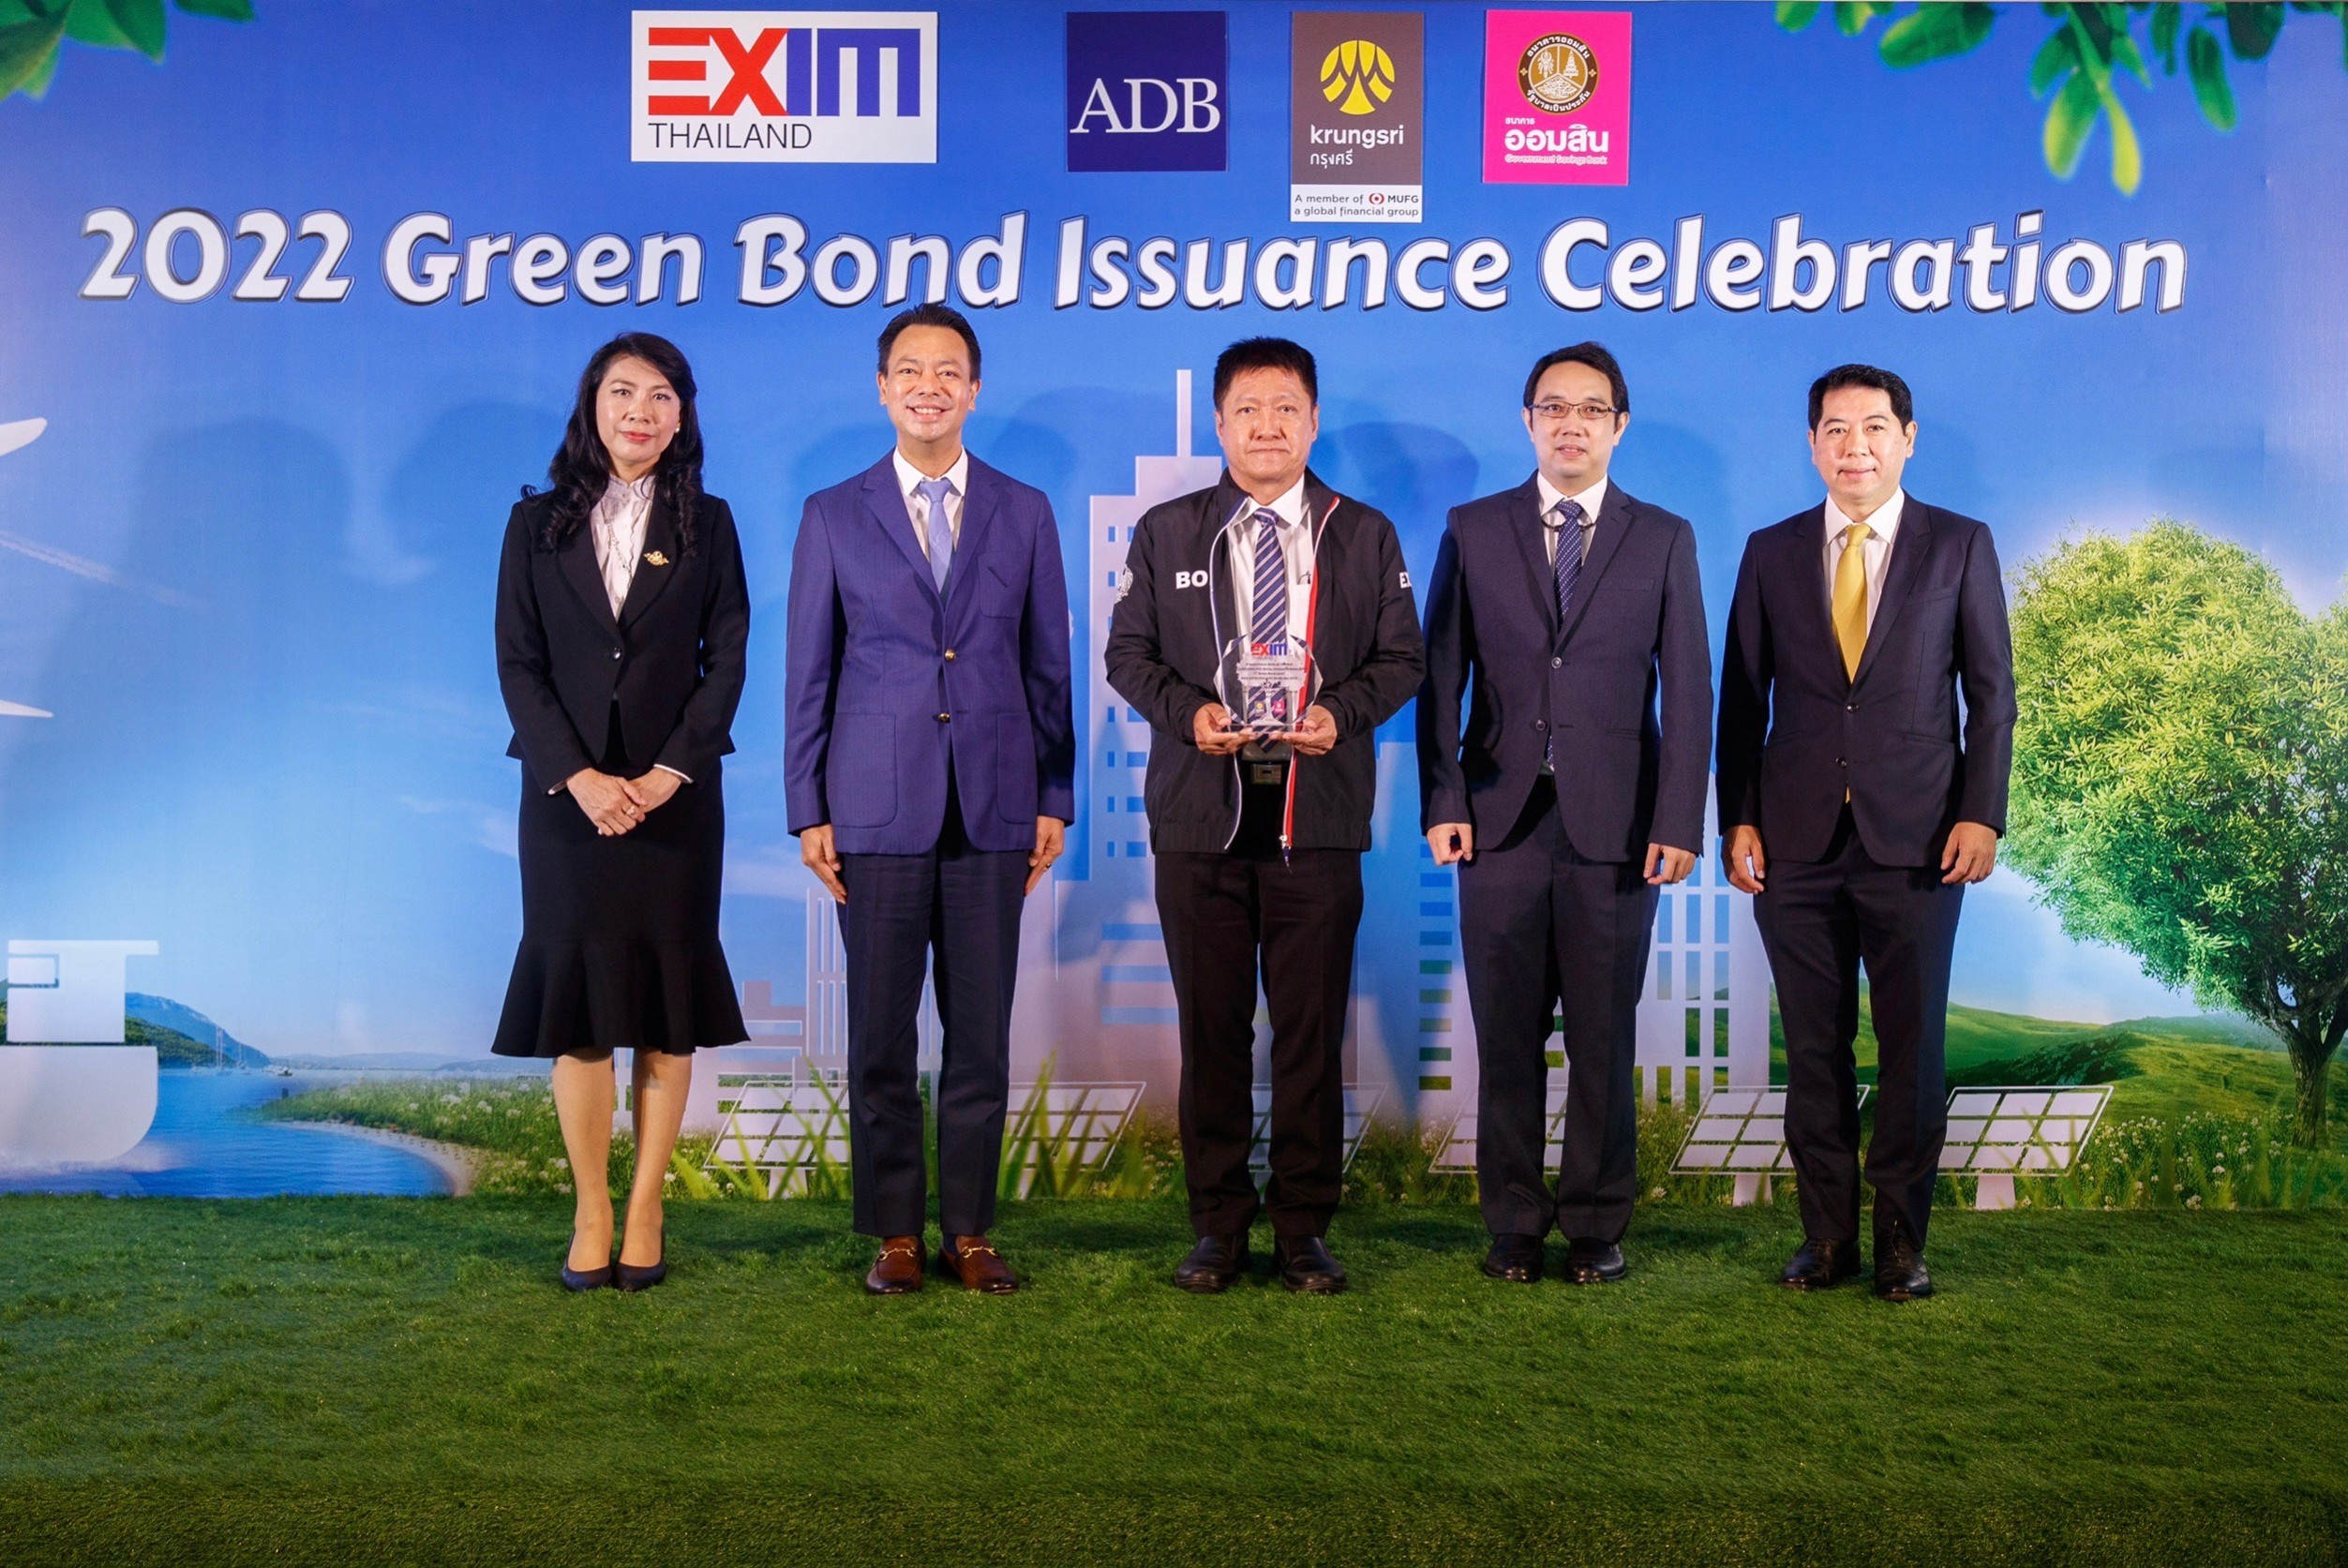 EXIM Thailand Celebrates Successful Green Bond Issue  to Support Clean Energy Projects Underlining Its Commitment  toward Development Bank and United Nations’ Sustainable Development Goals